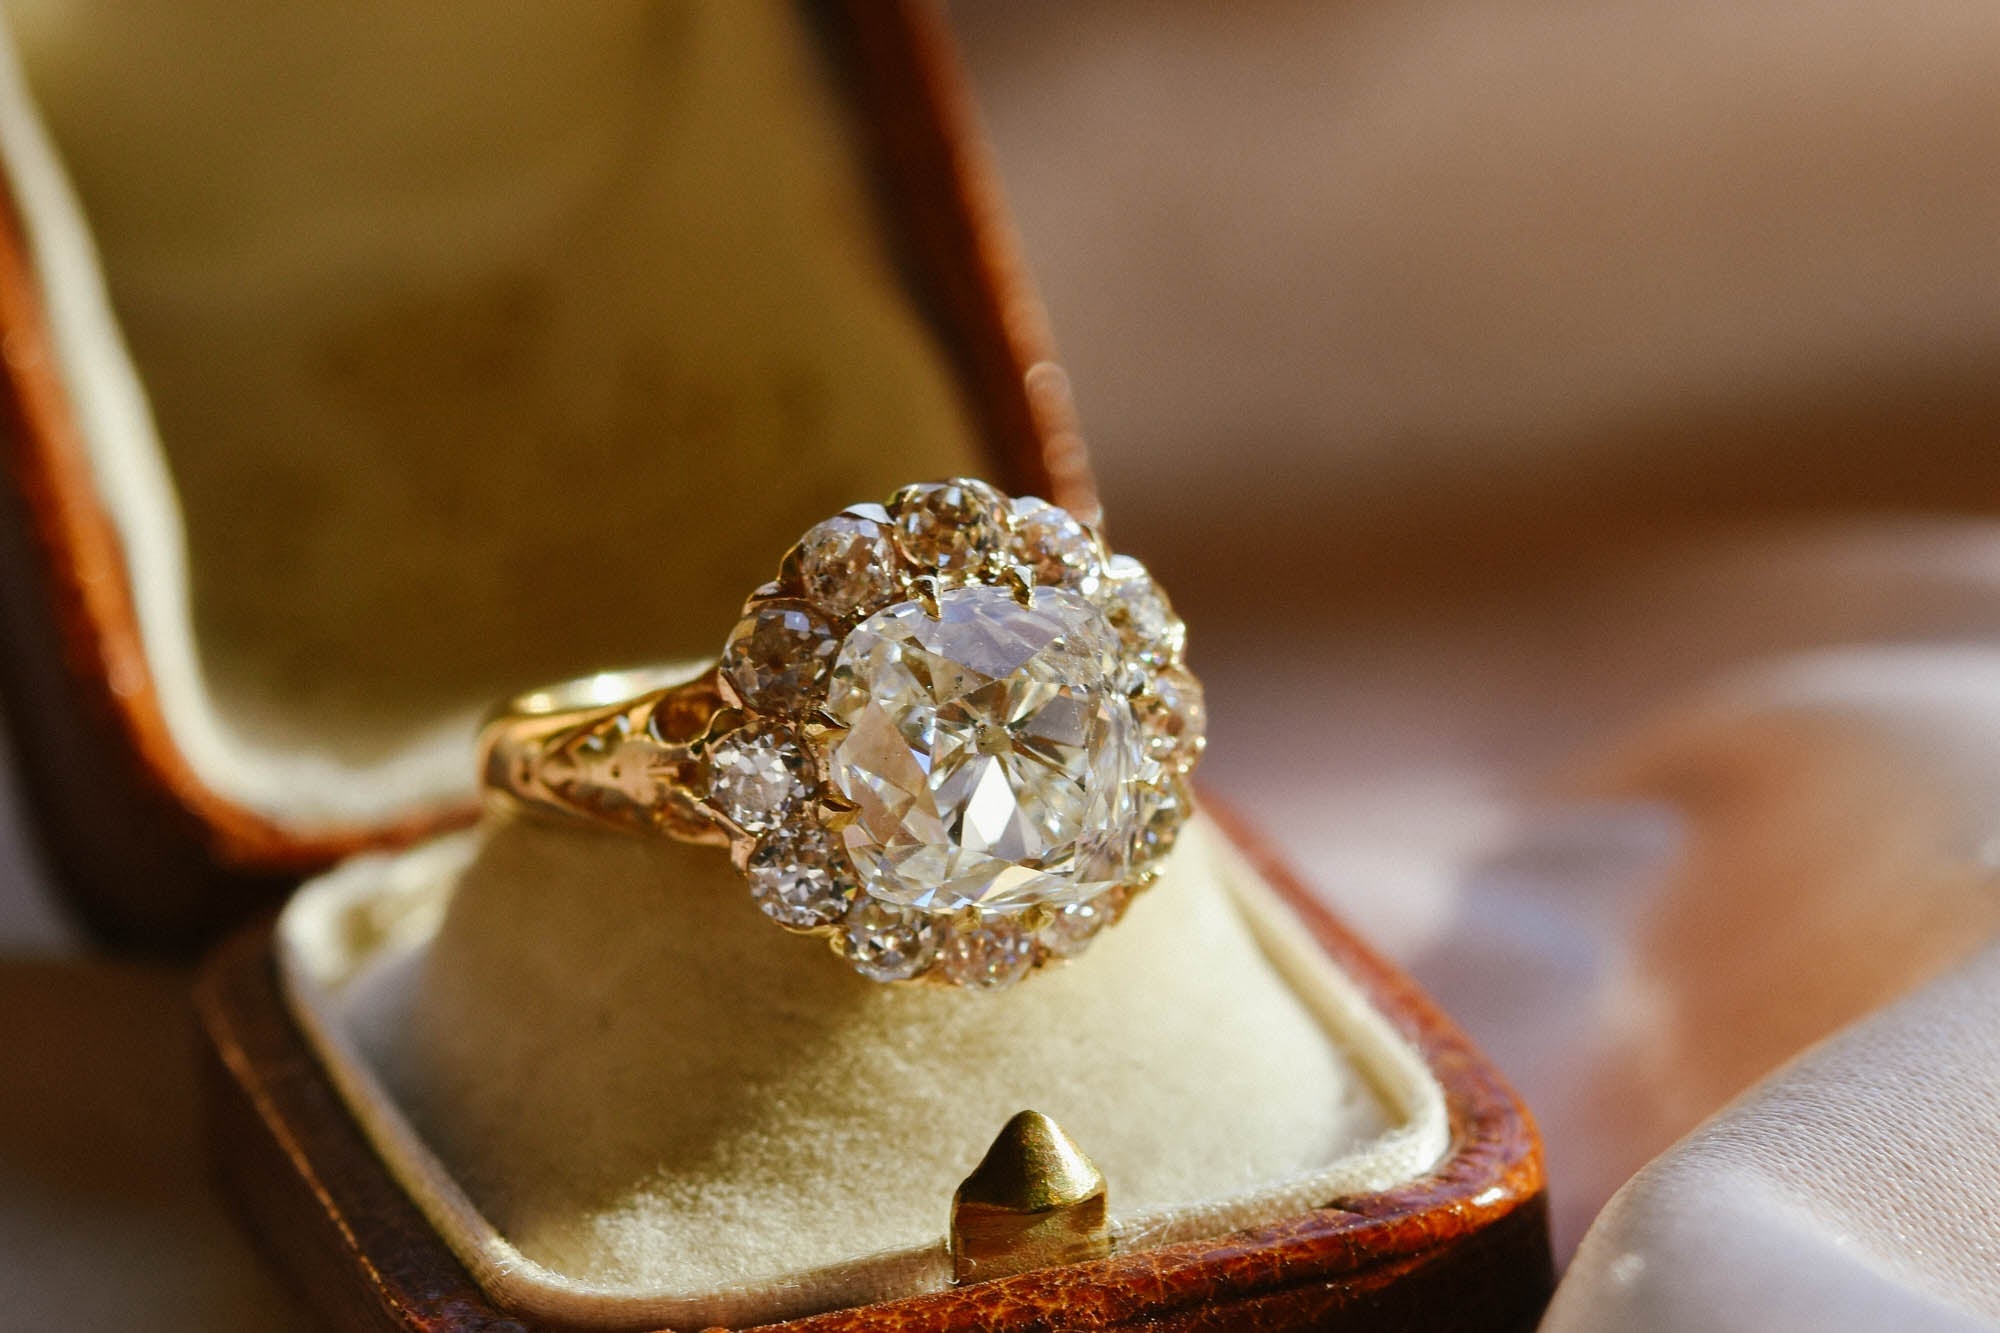 Vintage Engagement Rings at King Jewelers - King Jewelers | Jewelry Store  Nashville